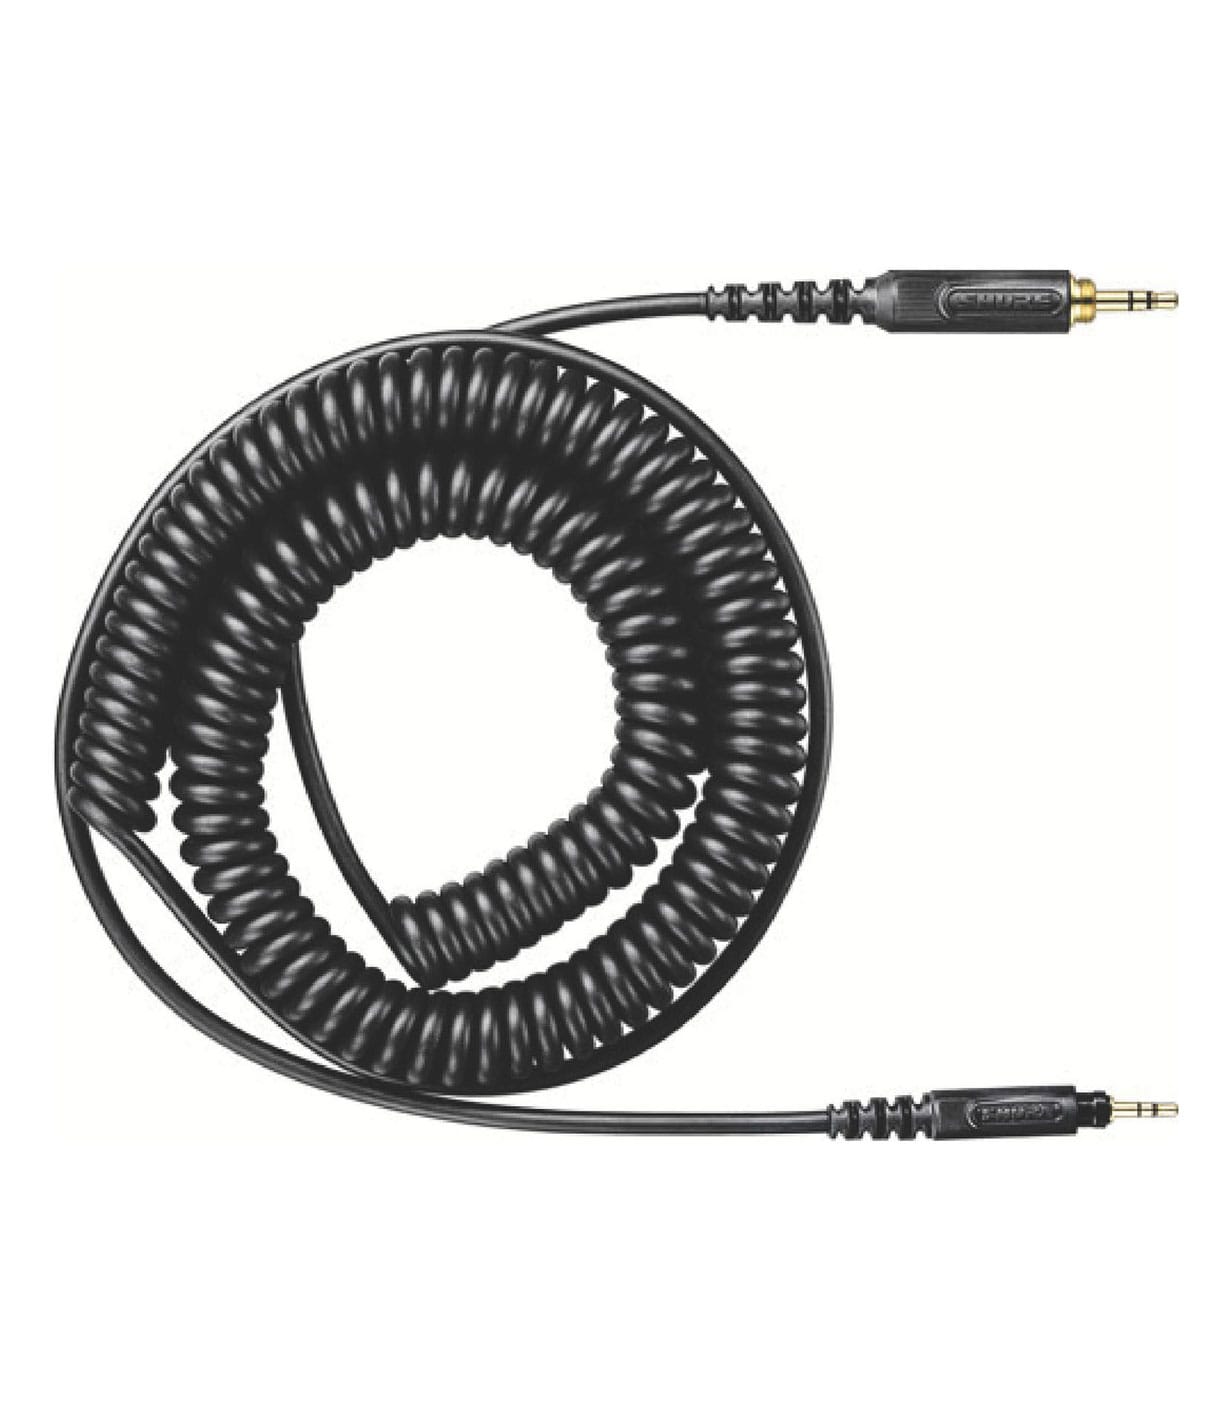 Shure - HPACA1 Coiled Replacement Cable for Shure Headphon